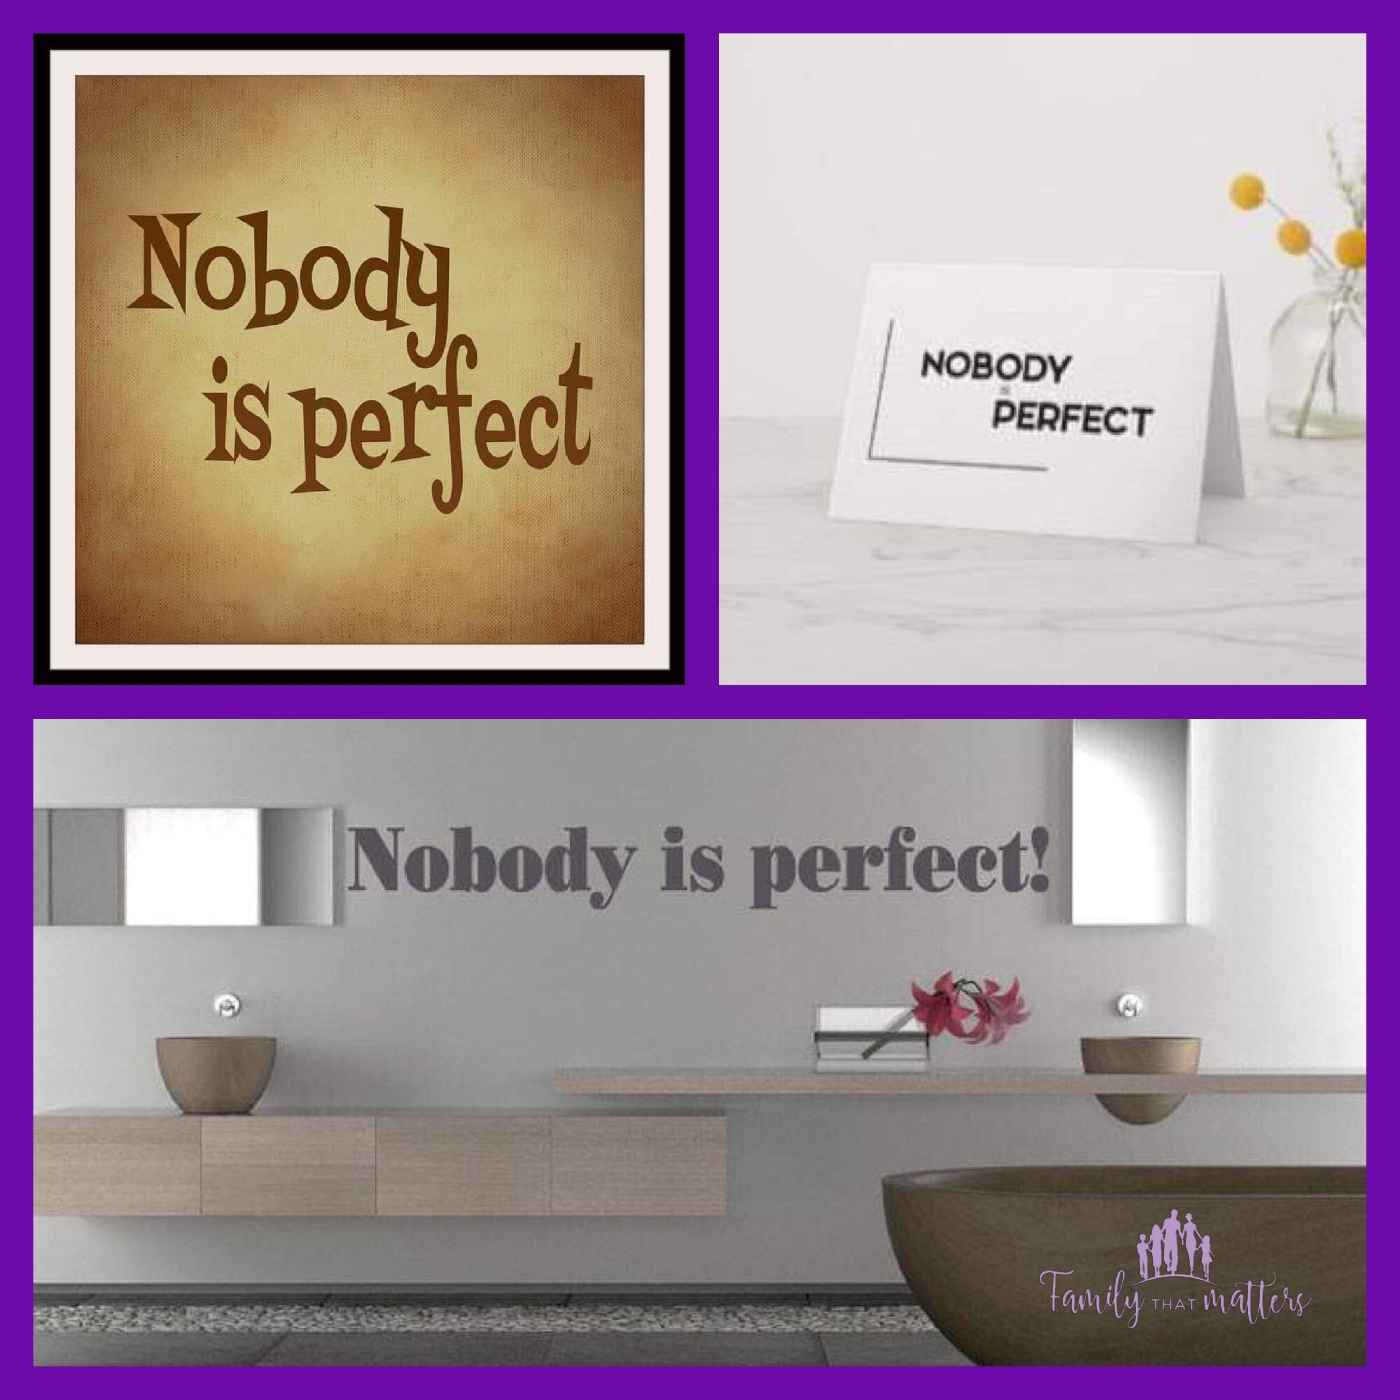 Nobody is perfect – but what about our own life?